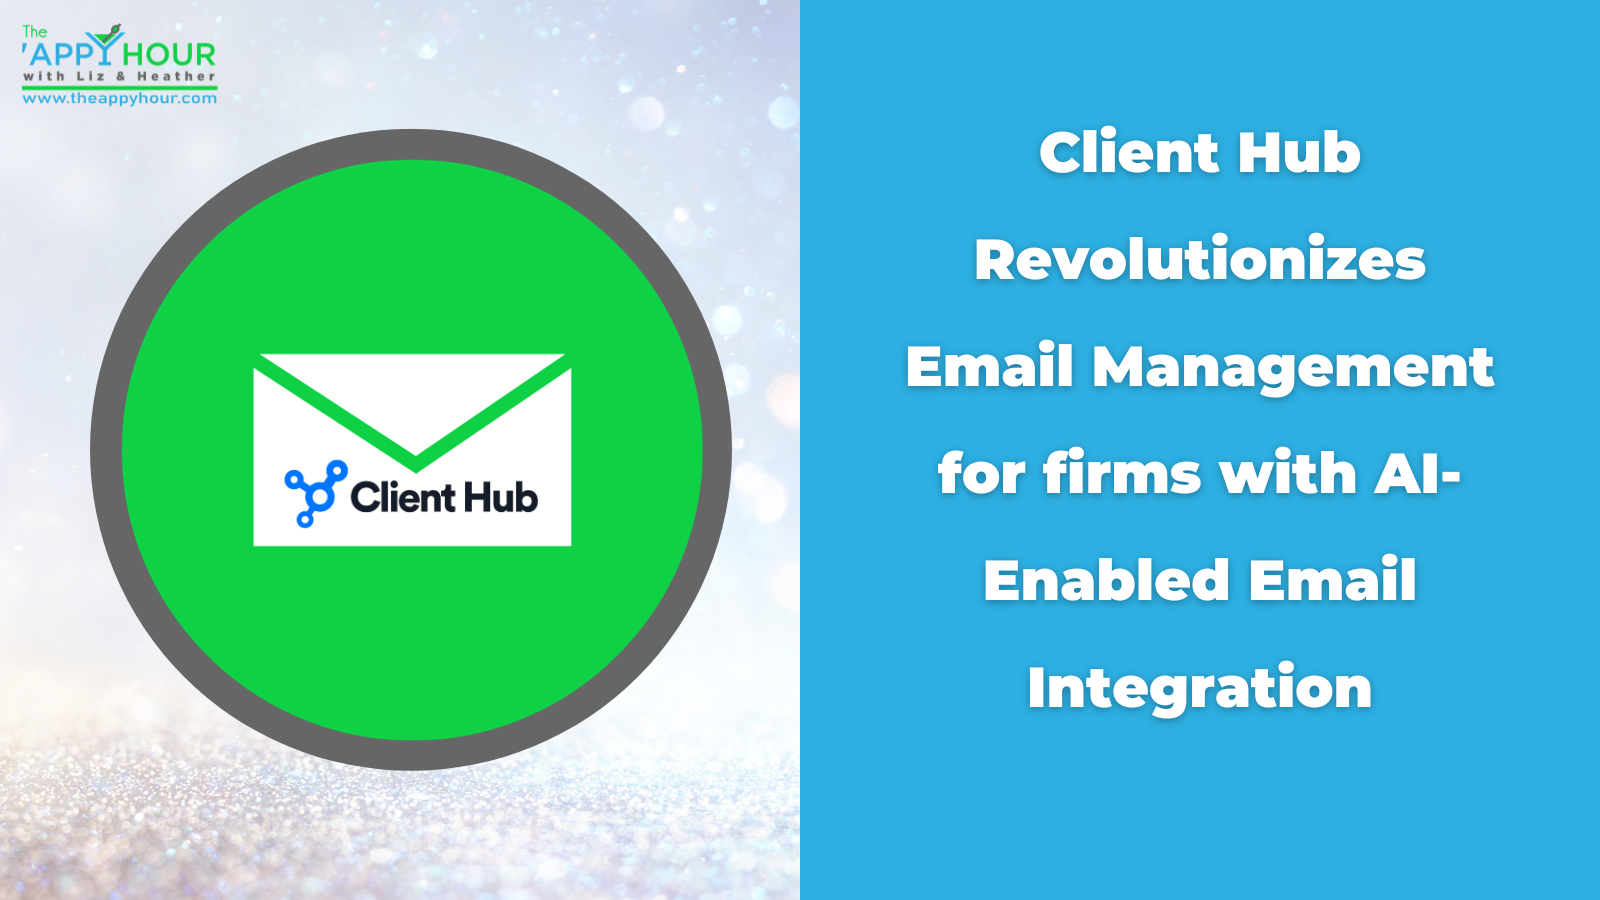 Client Hub Revolutionizes Email Management for firms with AI-Enabled Email Integration